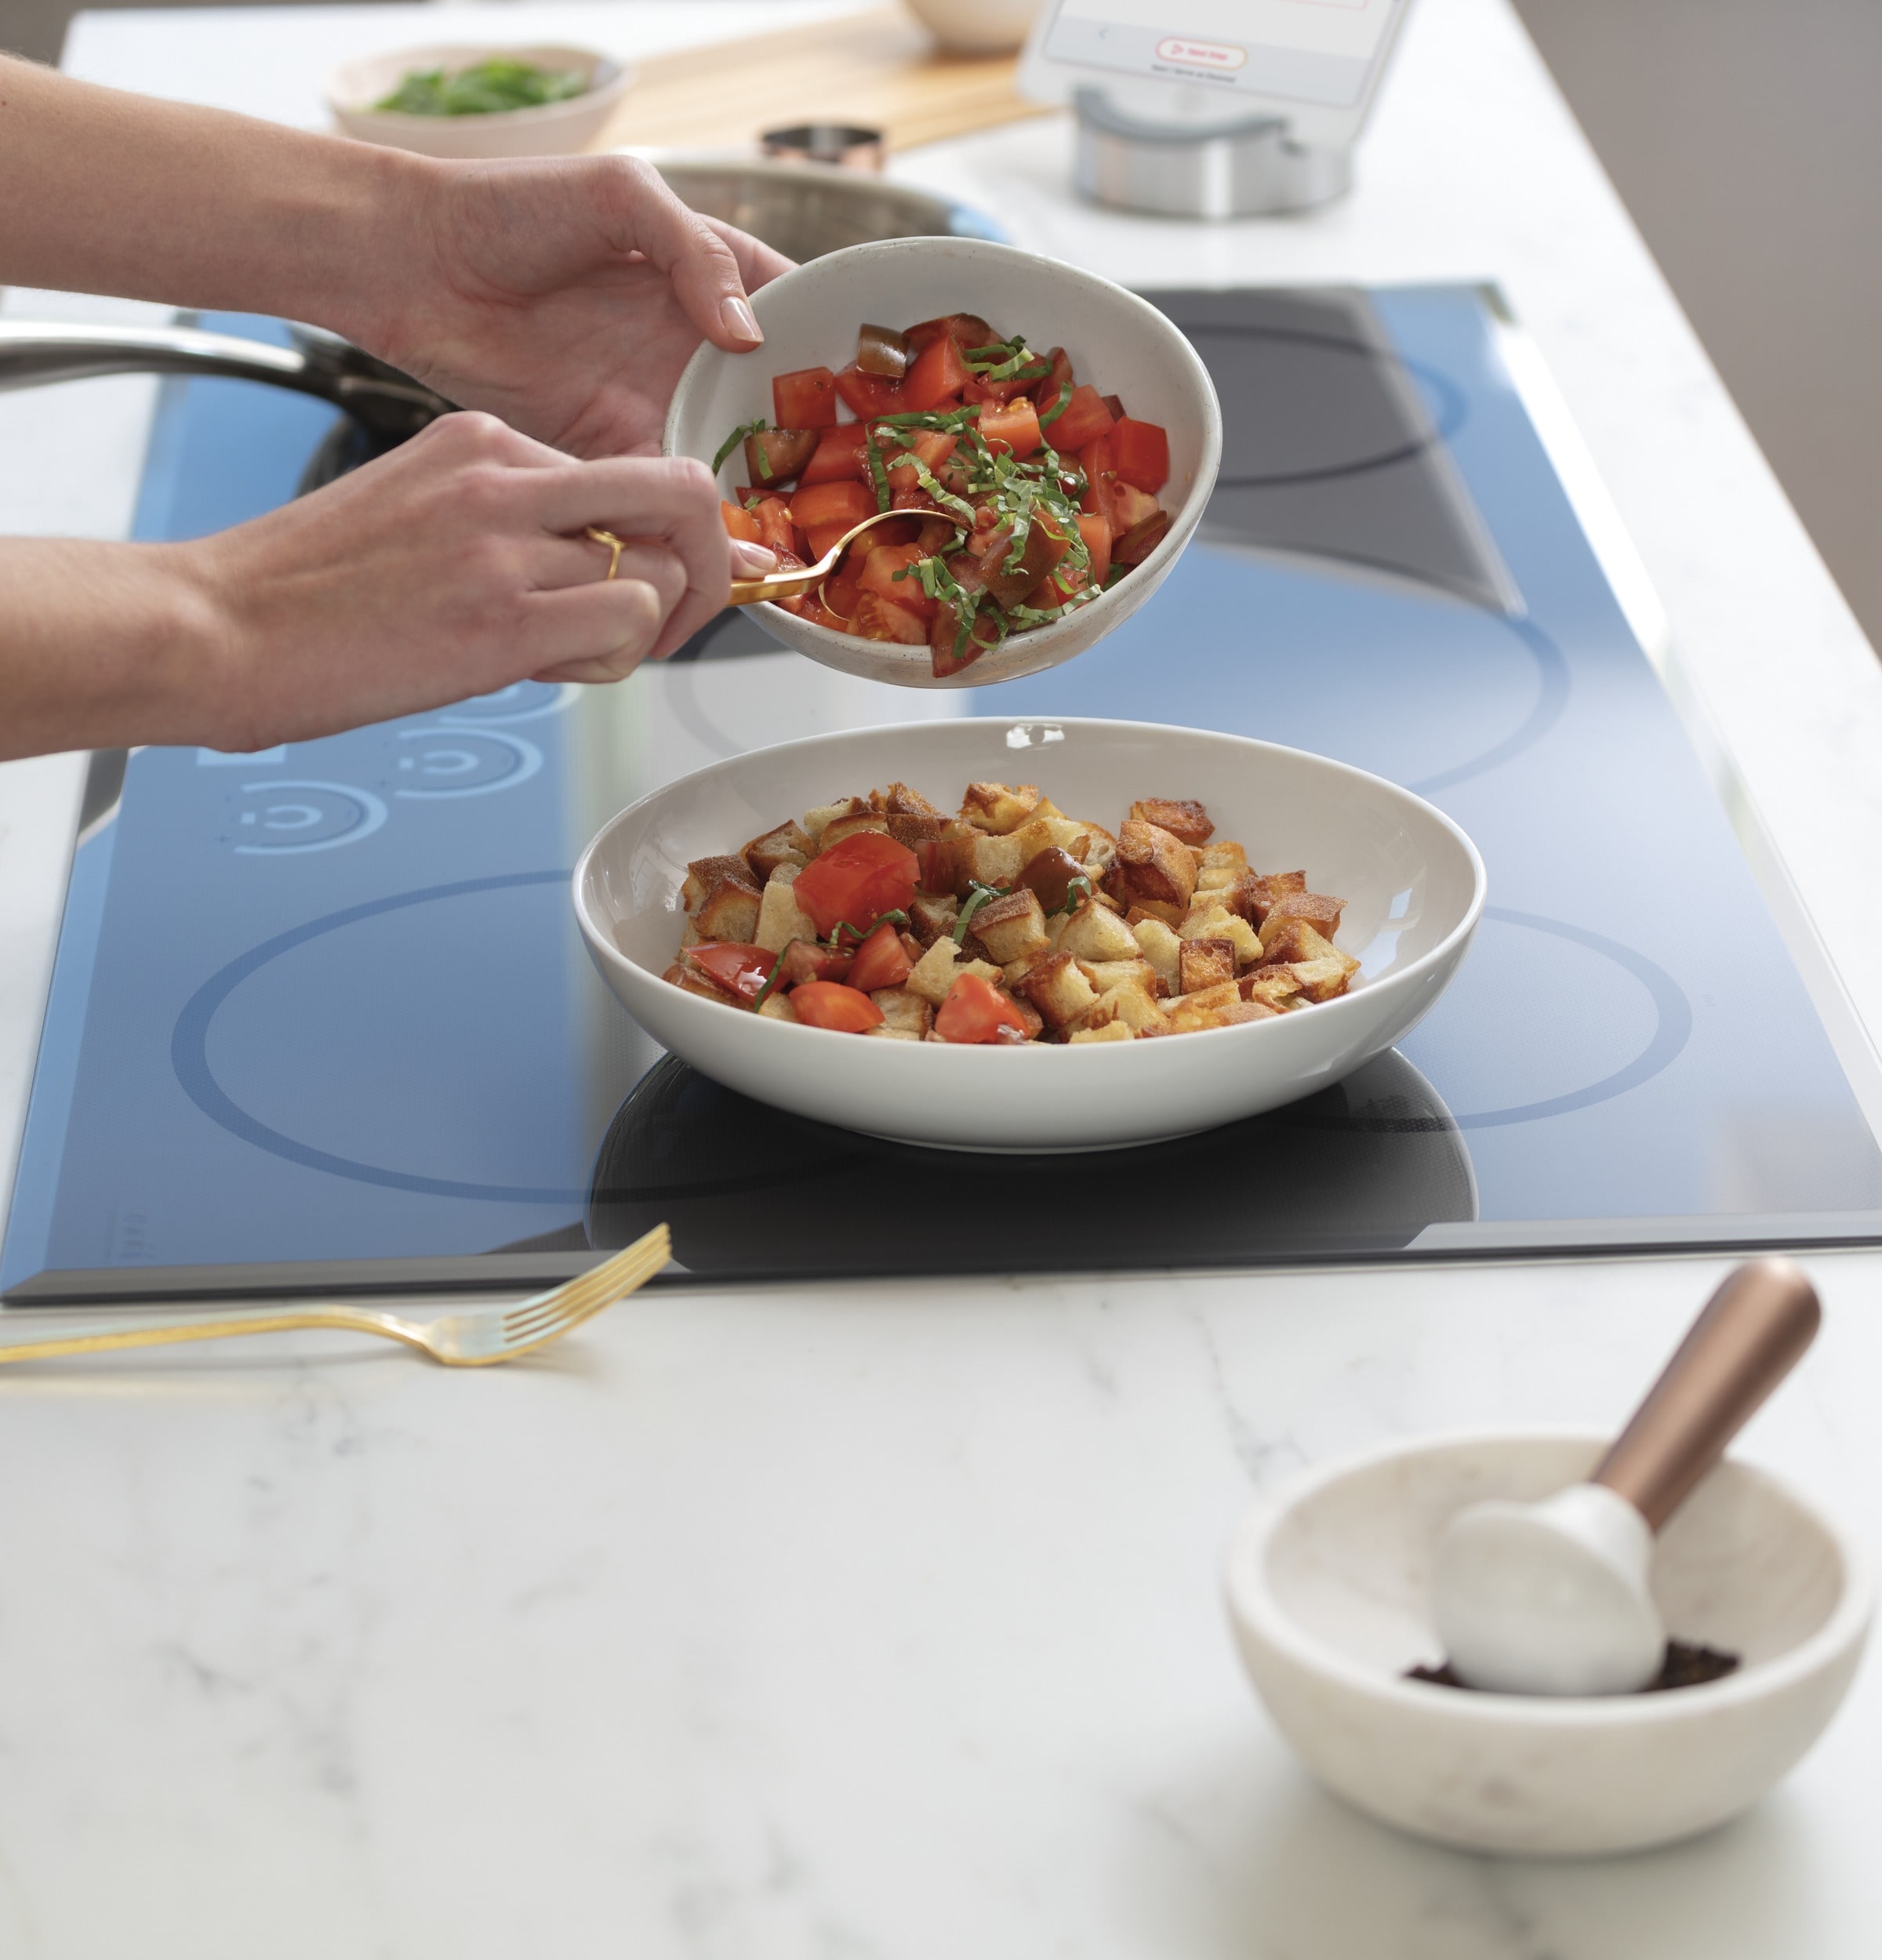 GE Café™ Series 36 Built-In Touch Control Induction Cooktop